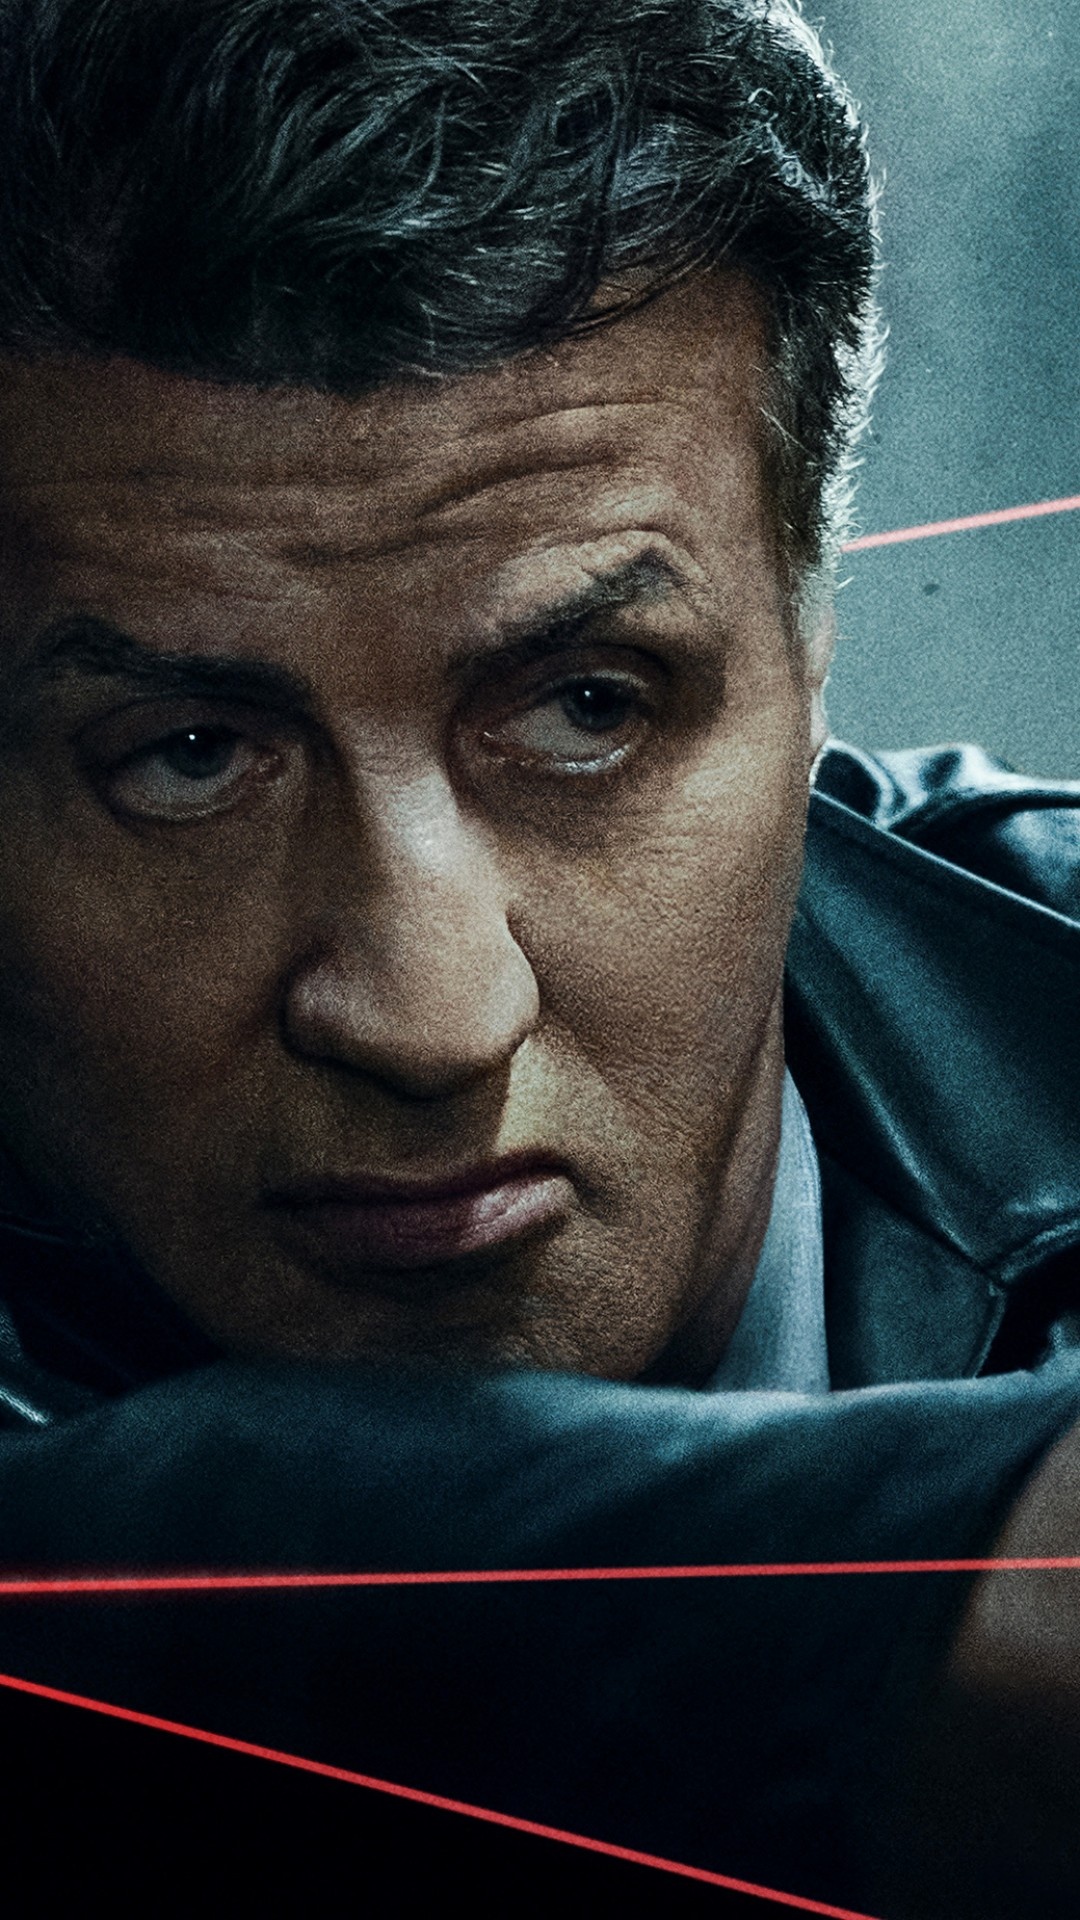 Sylvester Stallone, Movie actor, Escape Plan 2, 4K movies, 1080x1920 Full HD Phone